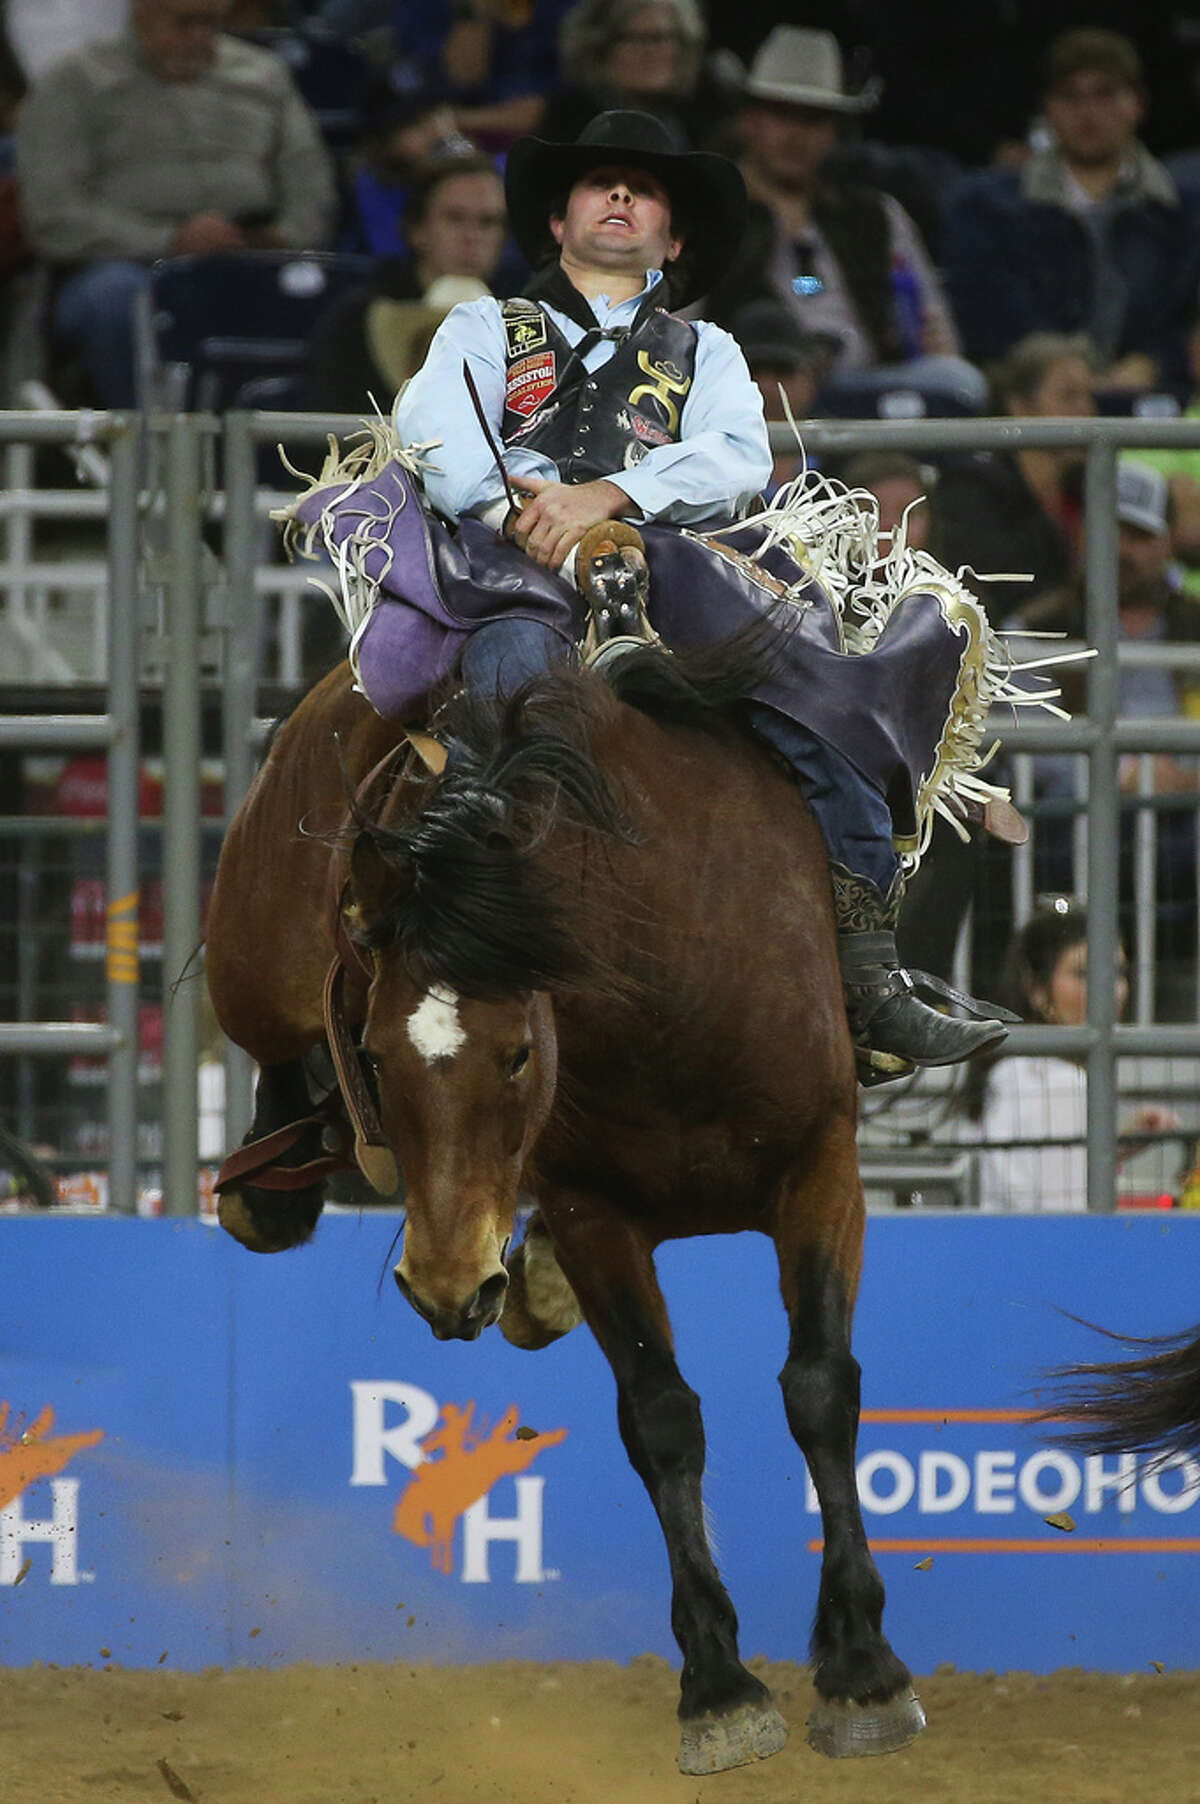 Cole Reiner, representing RODEOHOUSTON, scores 85 in bareback riding to win the Super Shootout at the Houston Livestock Show and Rodeo Saturday, March 12, 2022, at NRG Stadium in Houston.